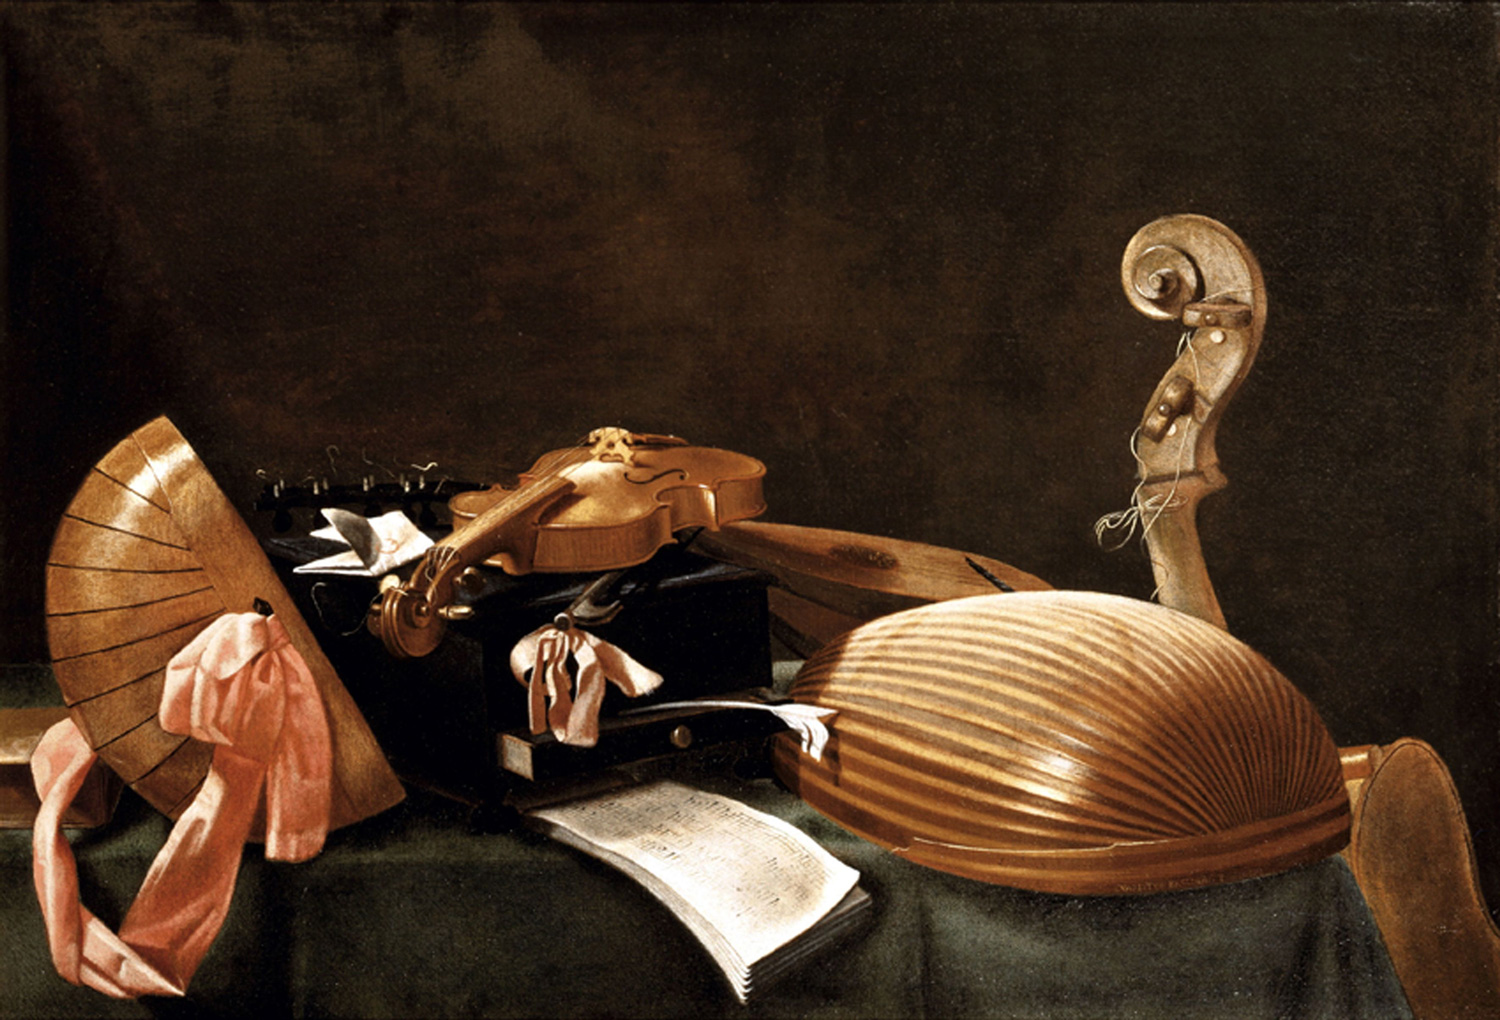 Light in the art and science of still life